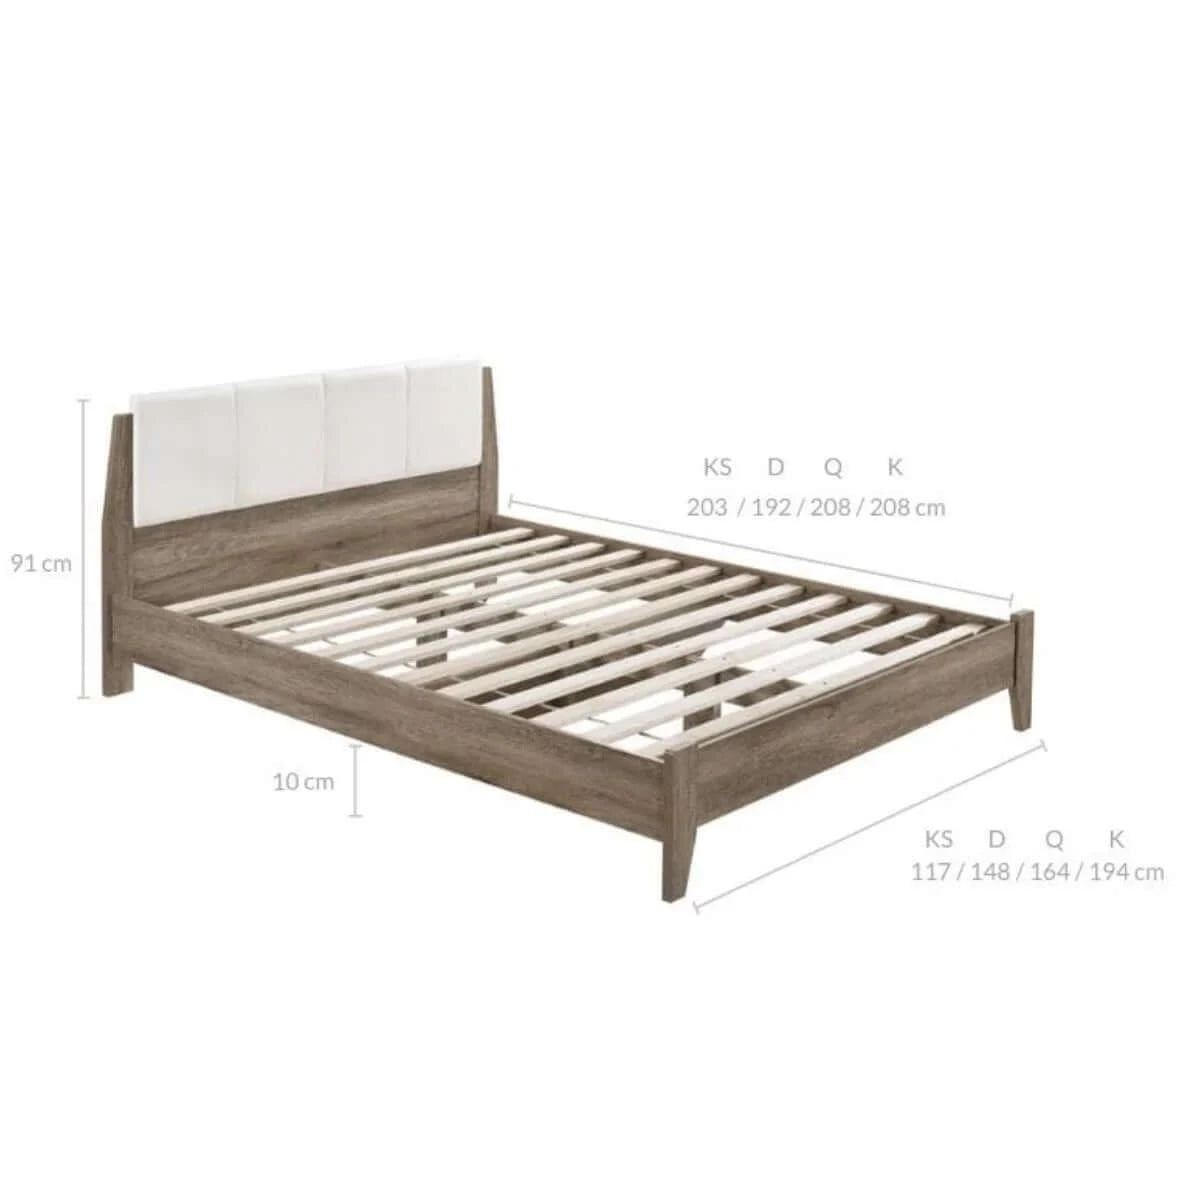 Buy wooden bed frame with leather upholstered bed head size king - upinteriors-Upinteriors